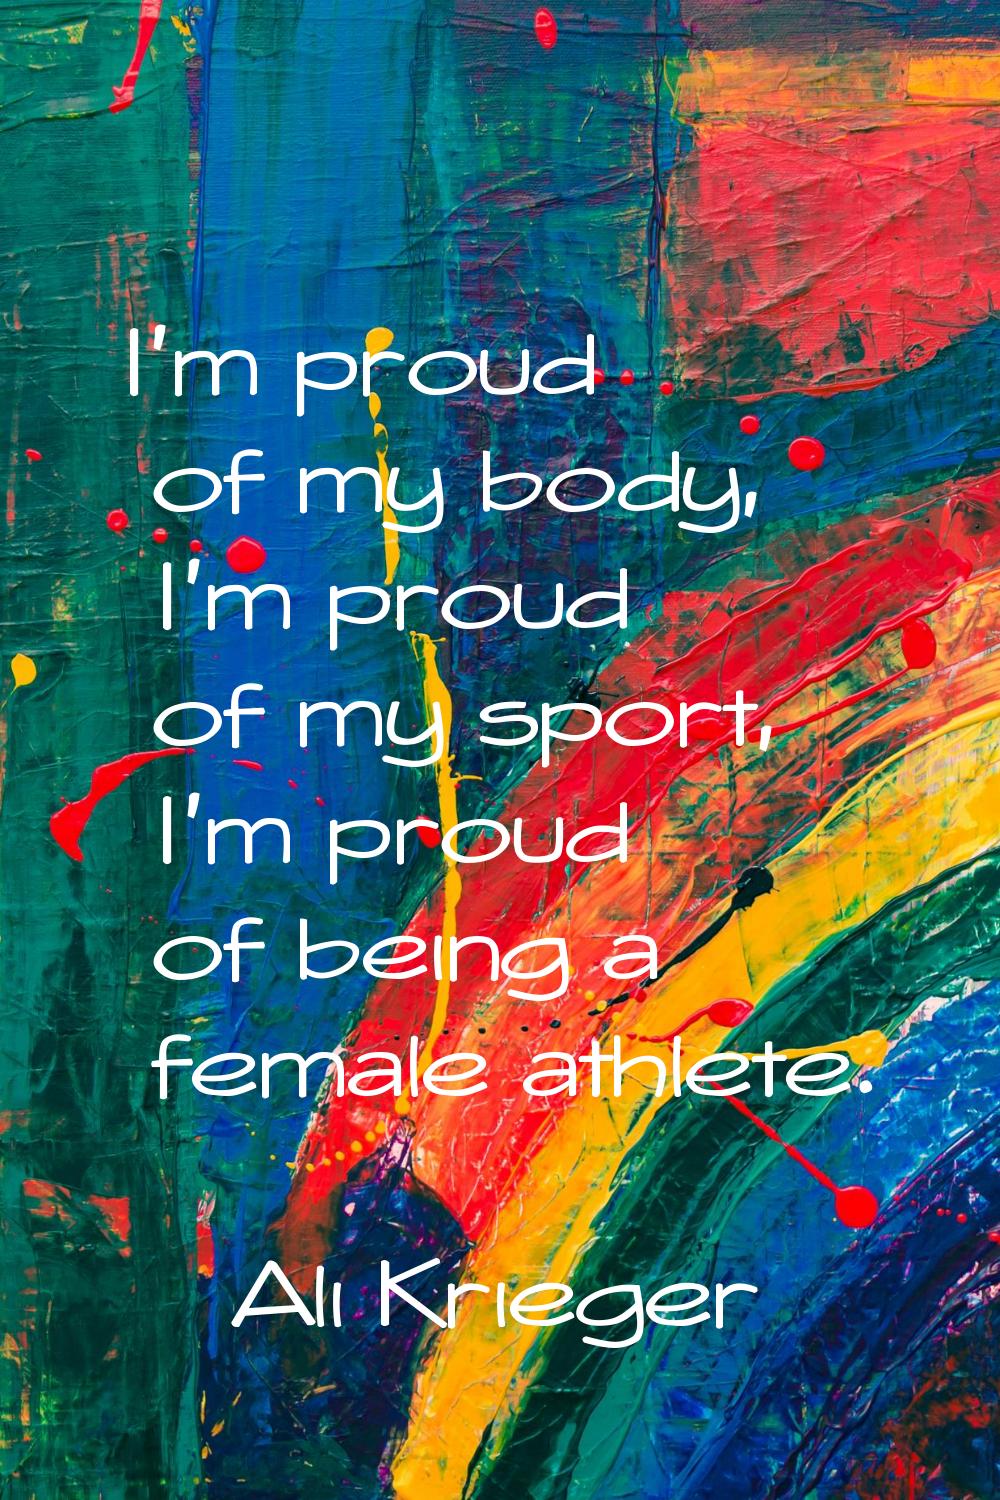 I'm proud of my body, I'm proud of my sport, I'm proud of being a female athlete.